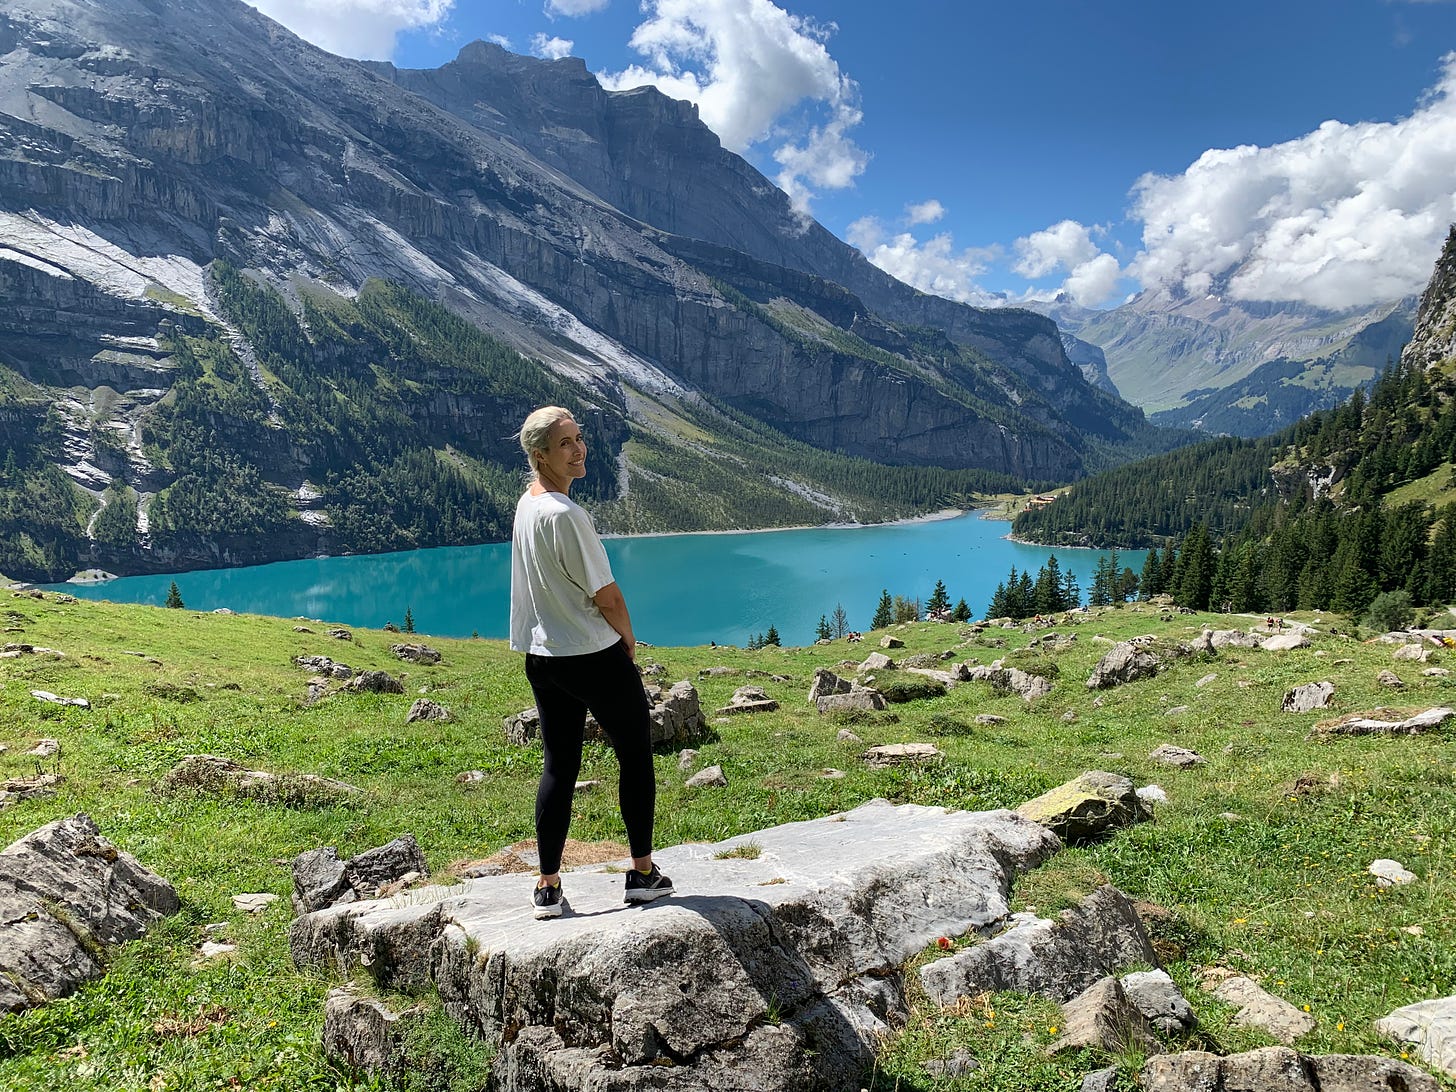 A white woman with blonde hair looks back to smile at the camera with a scenic, bright turquoise lake, mountains, trees, and grass beyond her.